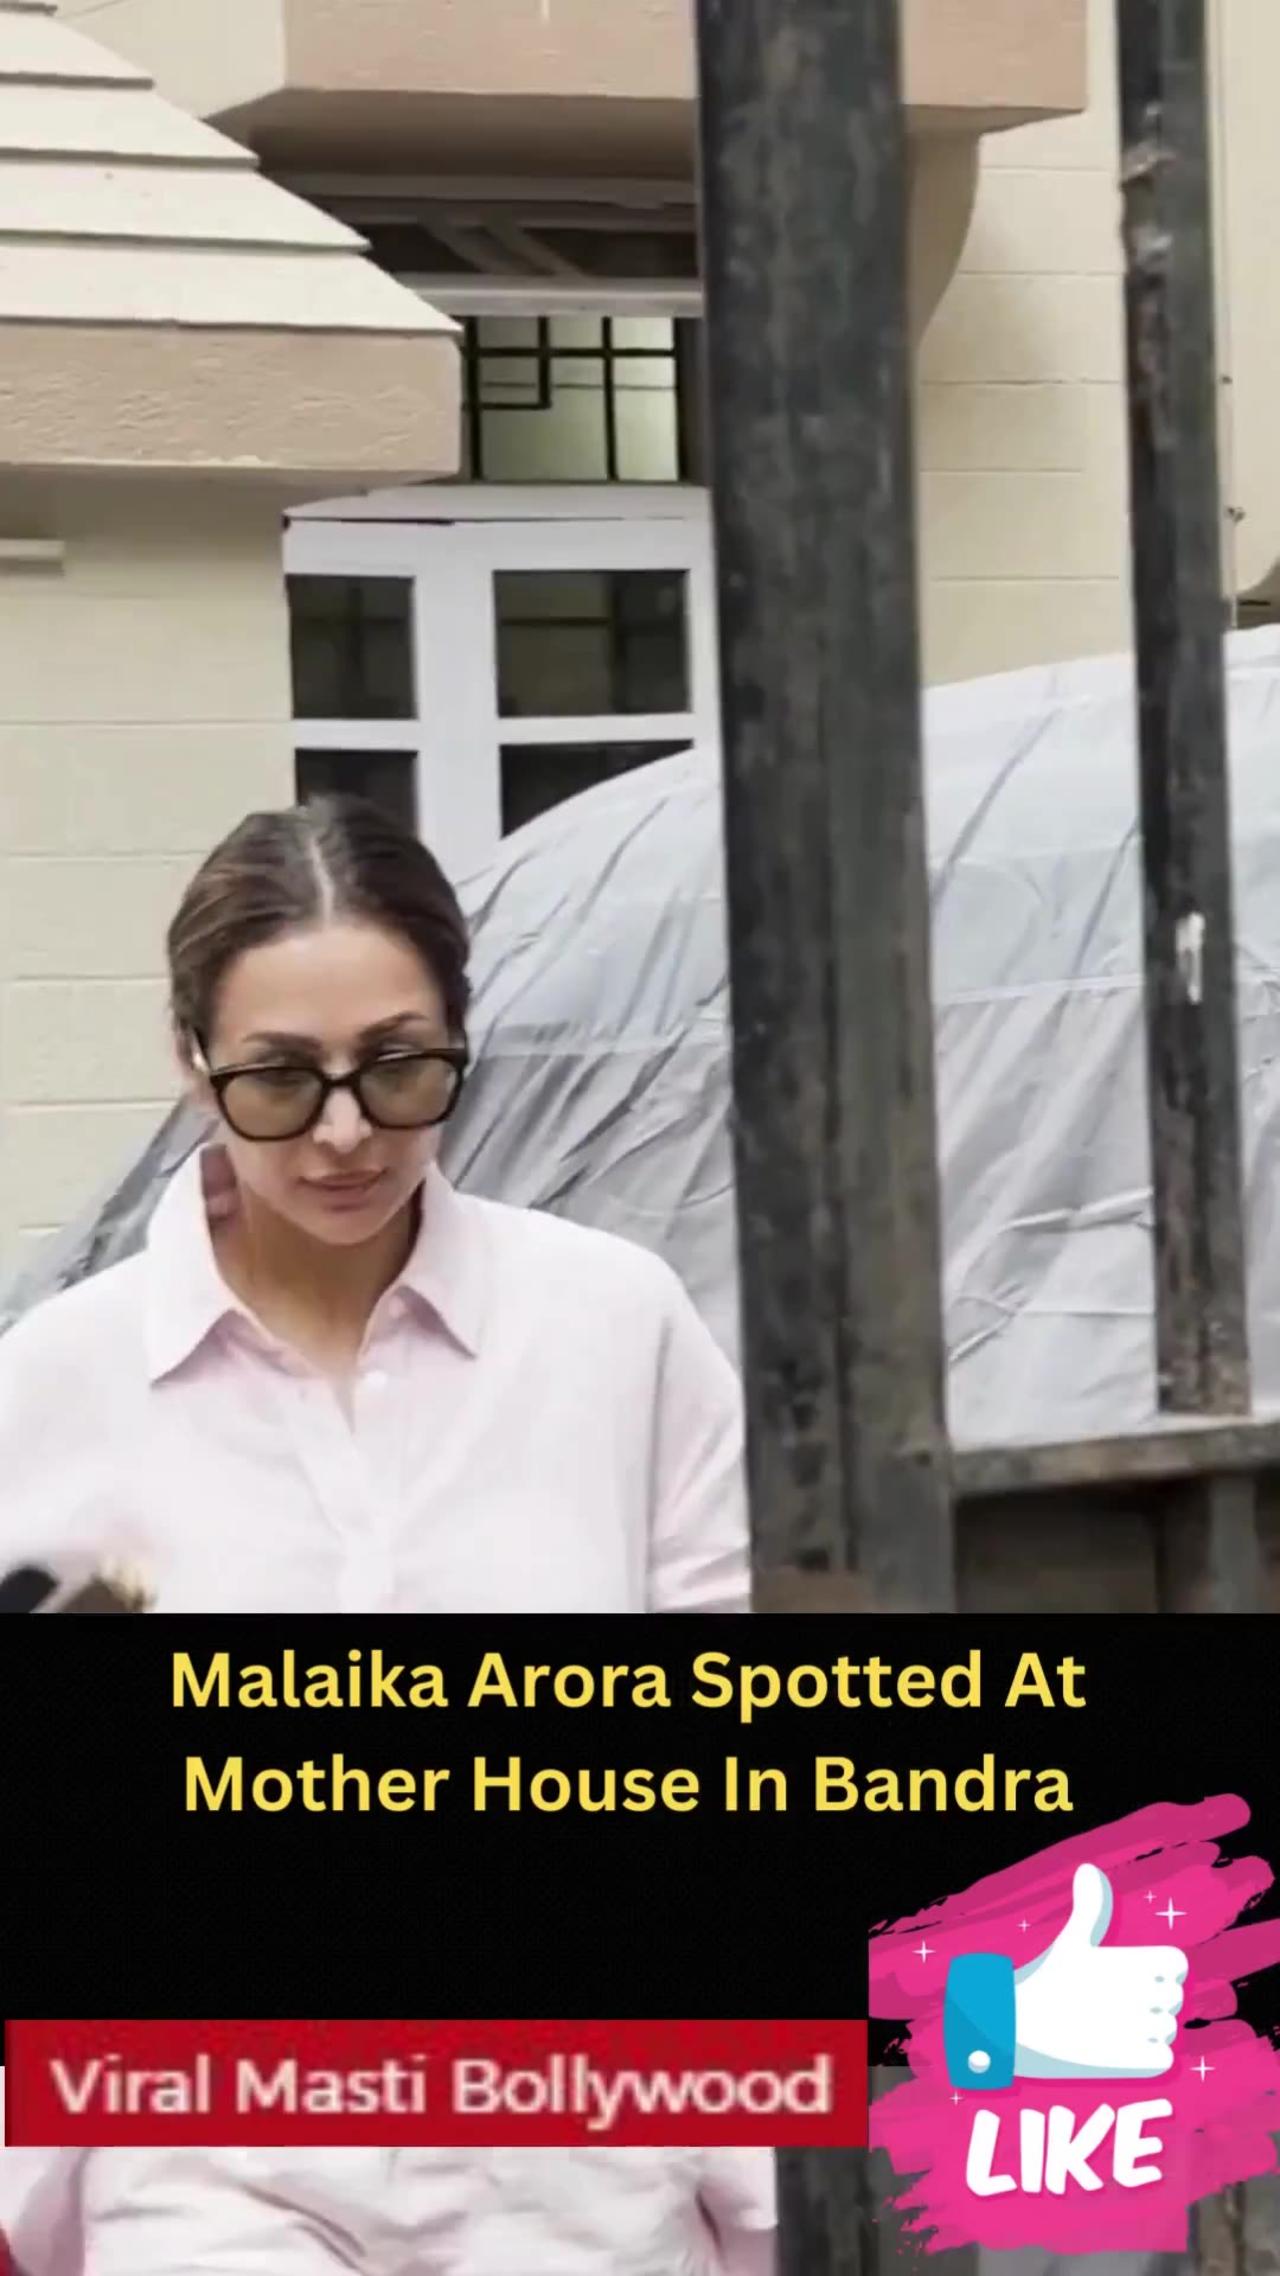 Malaika Arora Spotted At Mother House In Bandra